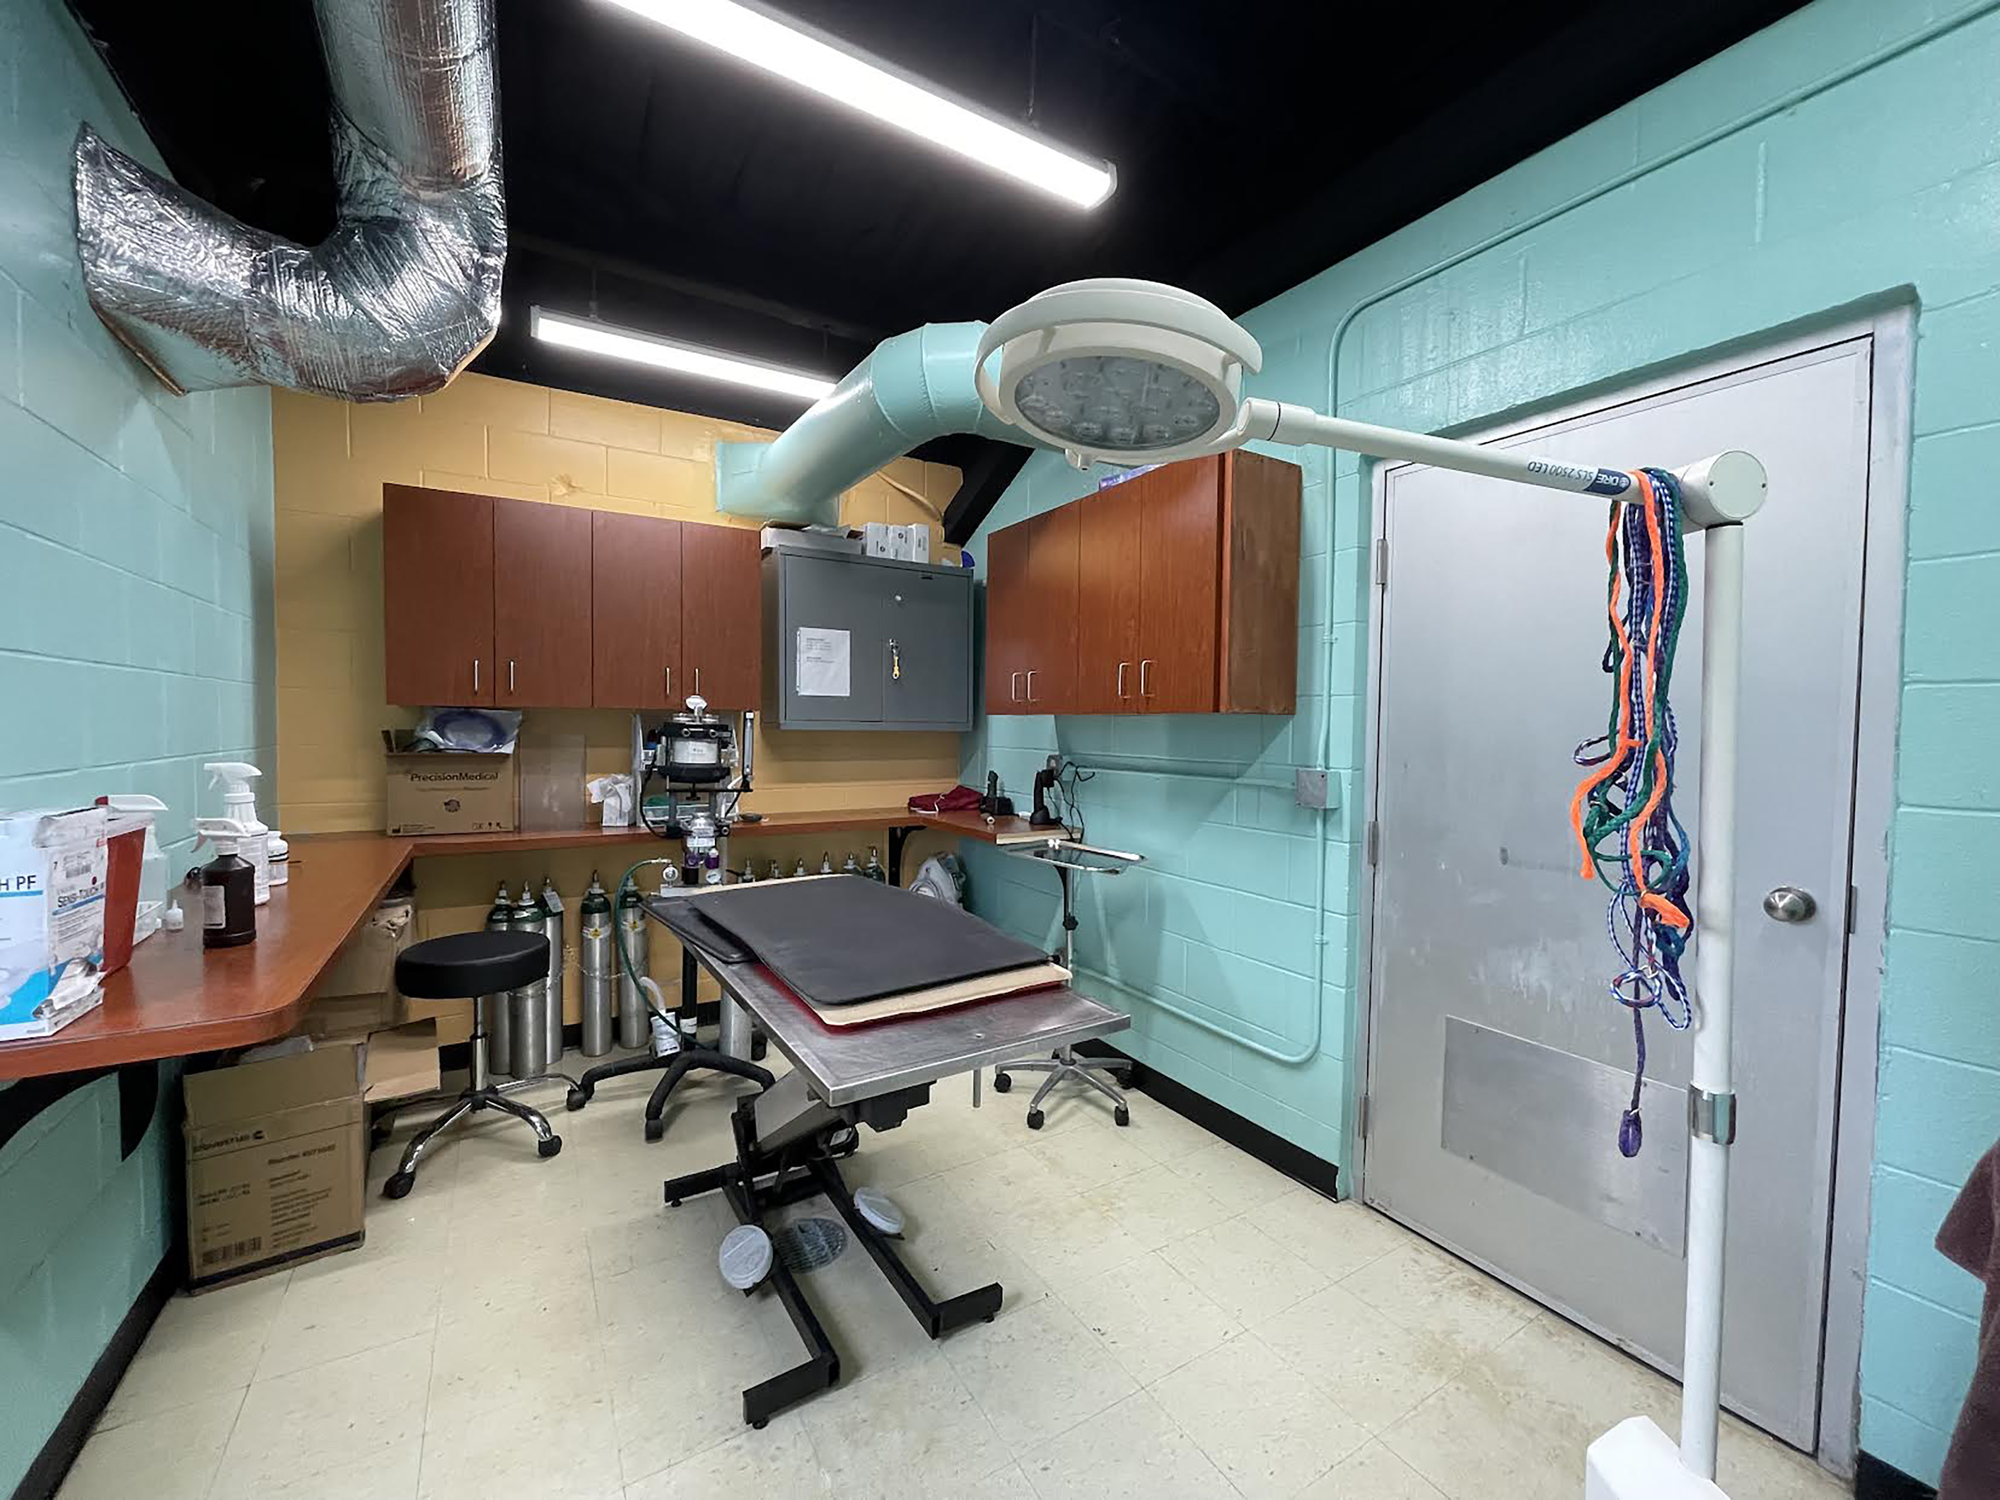 A storage closet was made into a room for surgeries and veterinarian care inside the Manatee County Animal Services shelter in Palmetto. The ceiling in the room had to be removed due to a rat infestation. Photo by Scott Lockwood